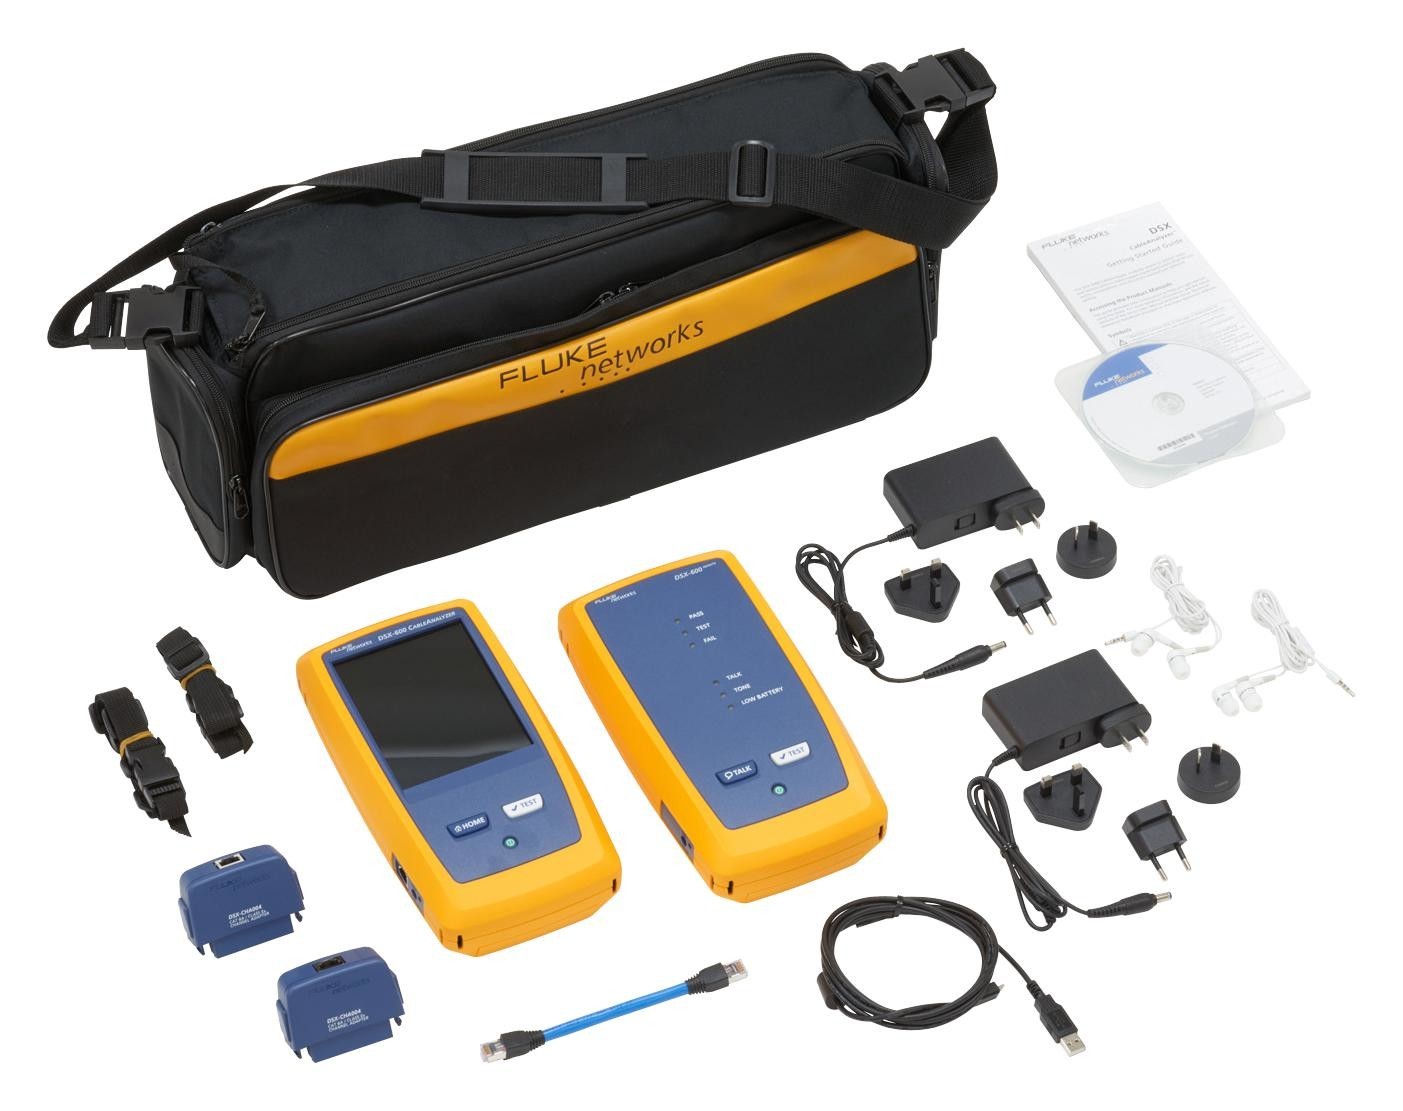 Fluke Networks Dsx-602 Int Network Cable Analyser, Wifi, Lcd